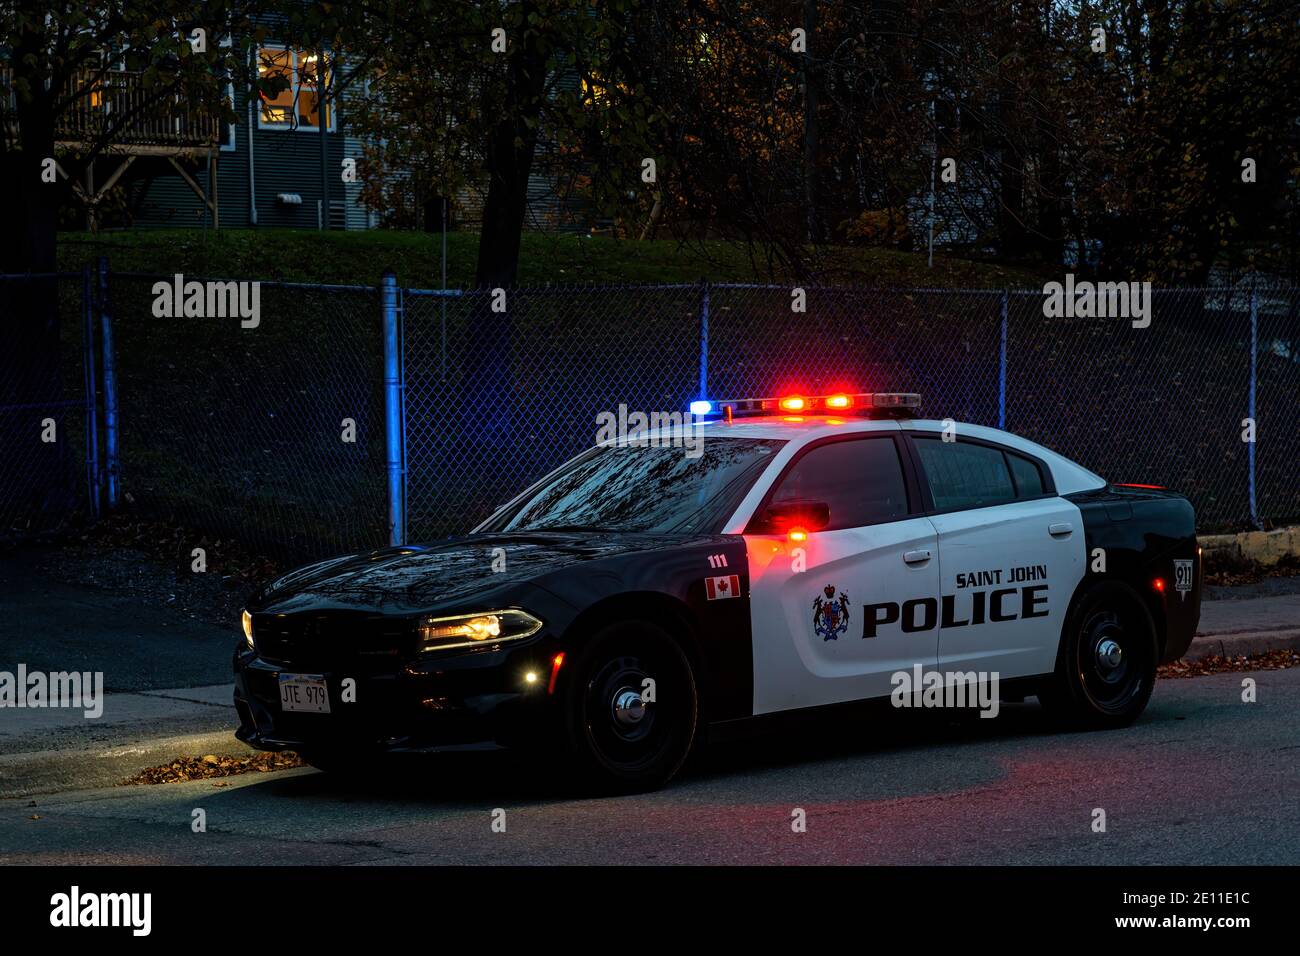 Saint John, NB, Canada - October 31, 2020: A police car at the side of the road after sunset. The red and blue lights are illuminated. Stock Photo